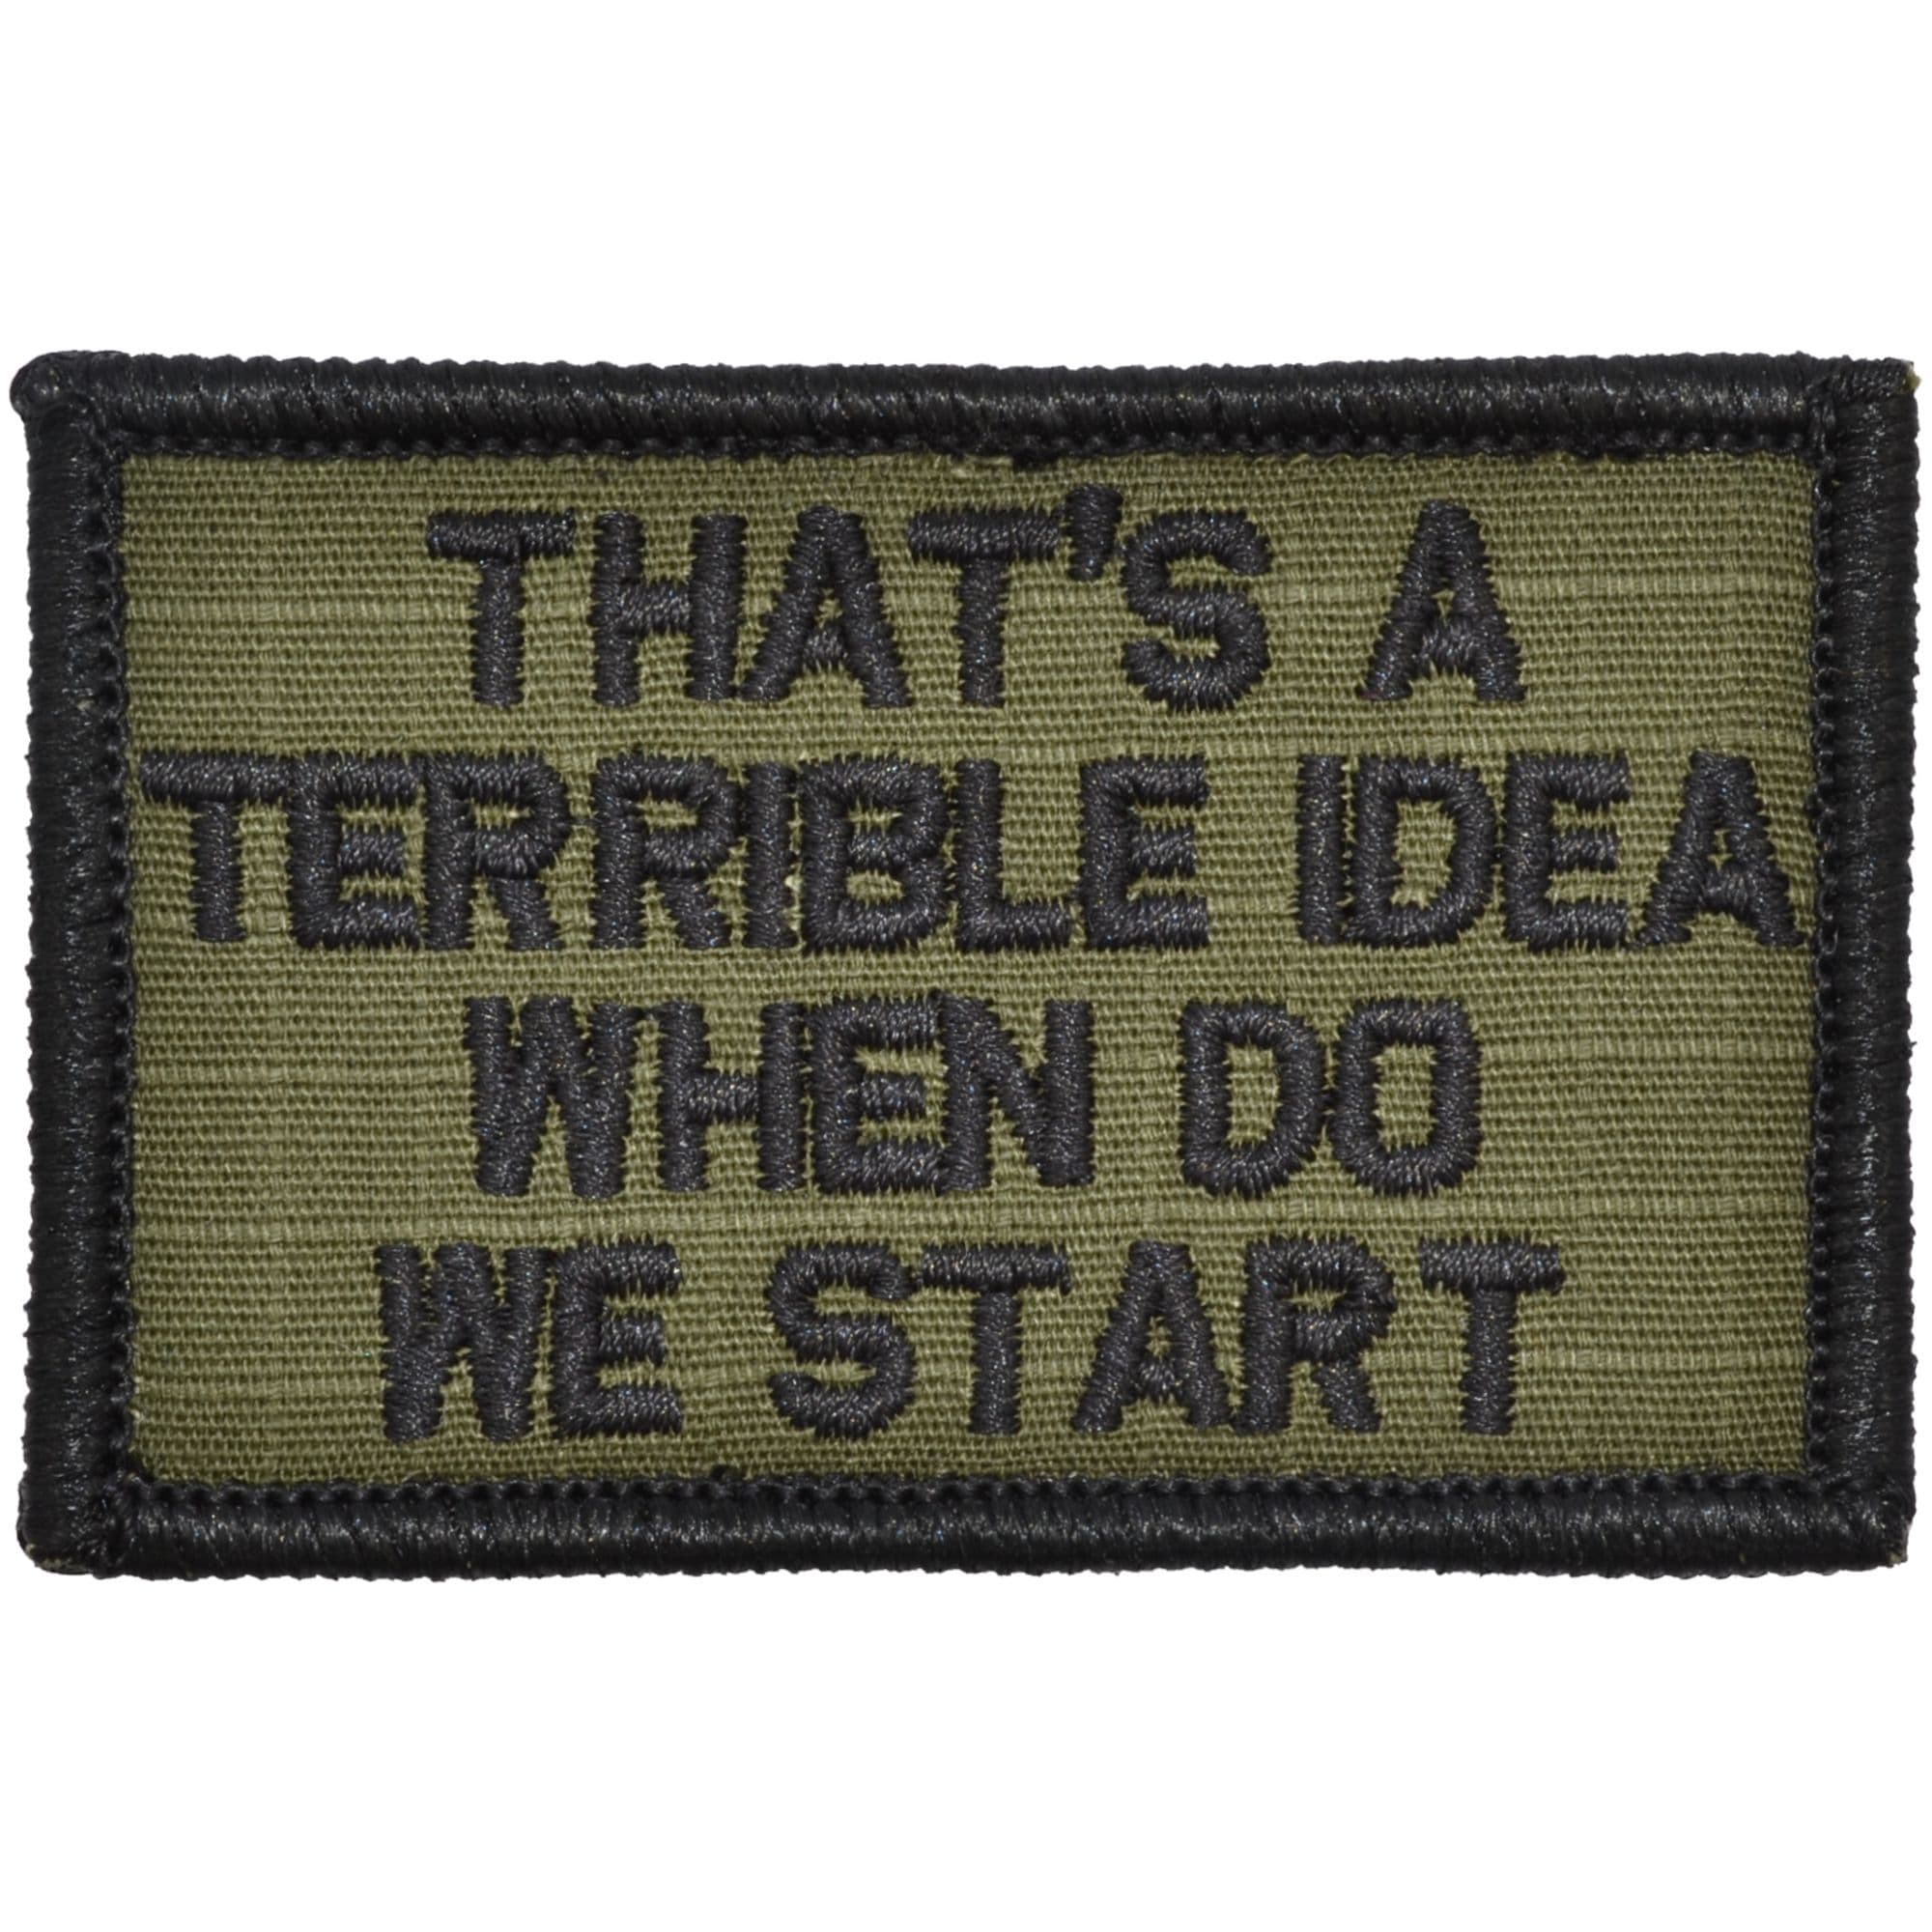 Tactical Gear Junkie Patches Olive Drab That's a Terrible Idea When Do We Start - 2x3 Patch